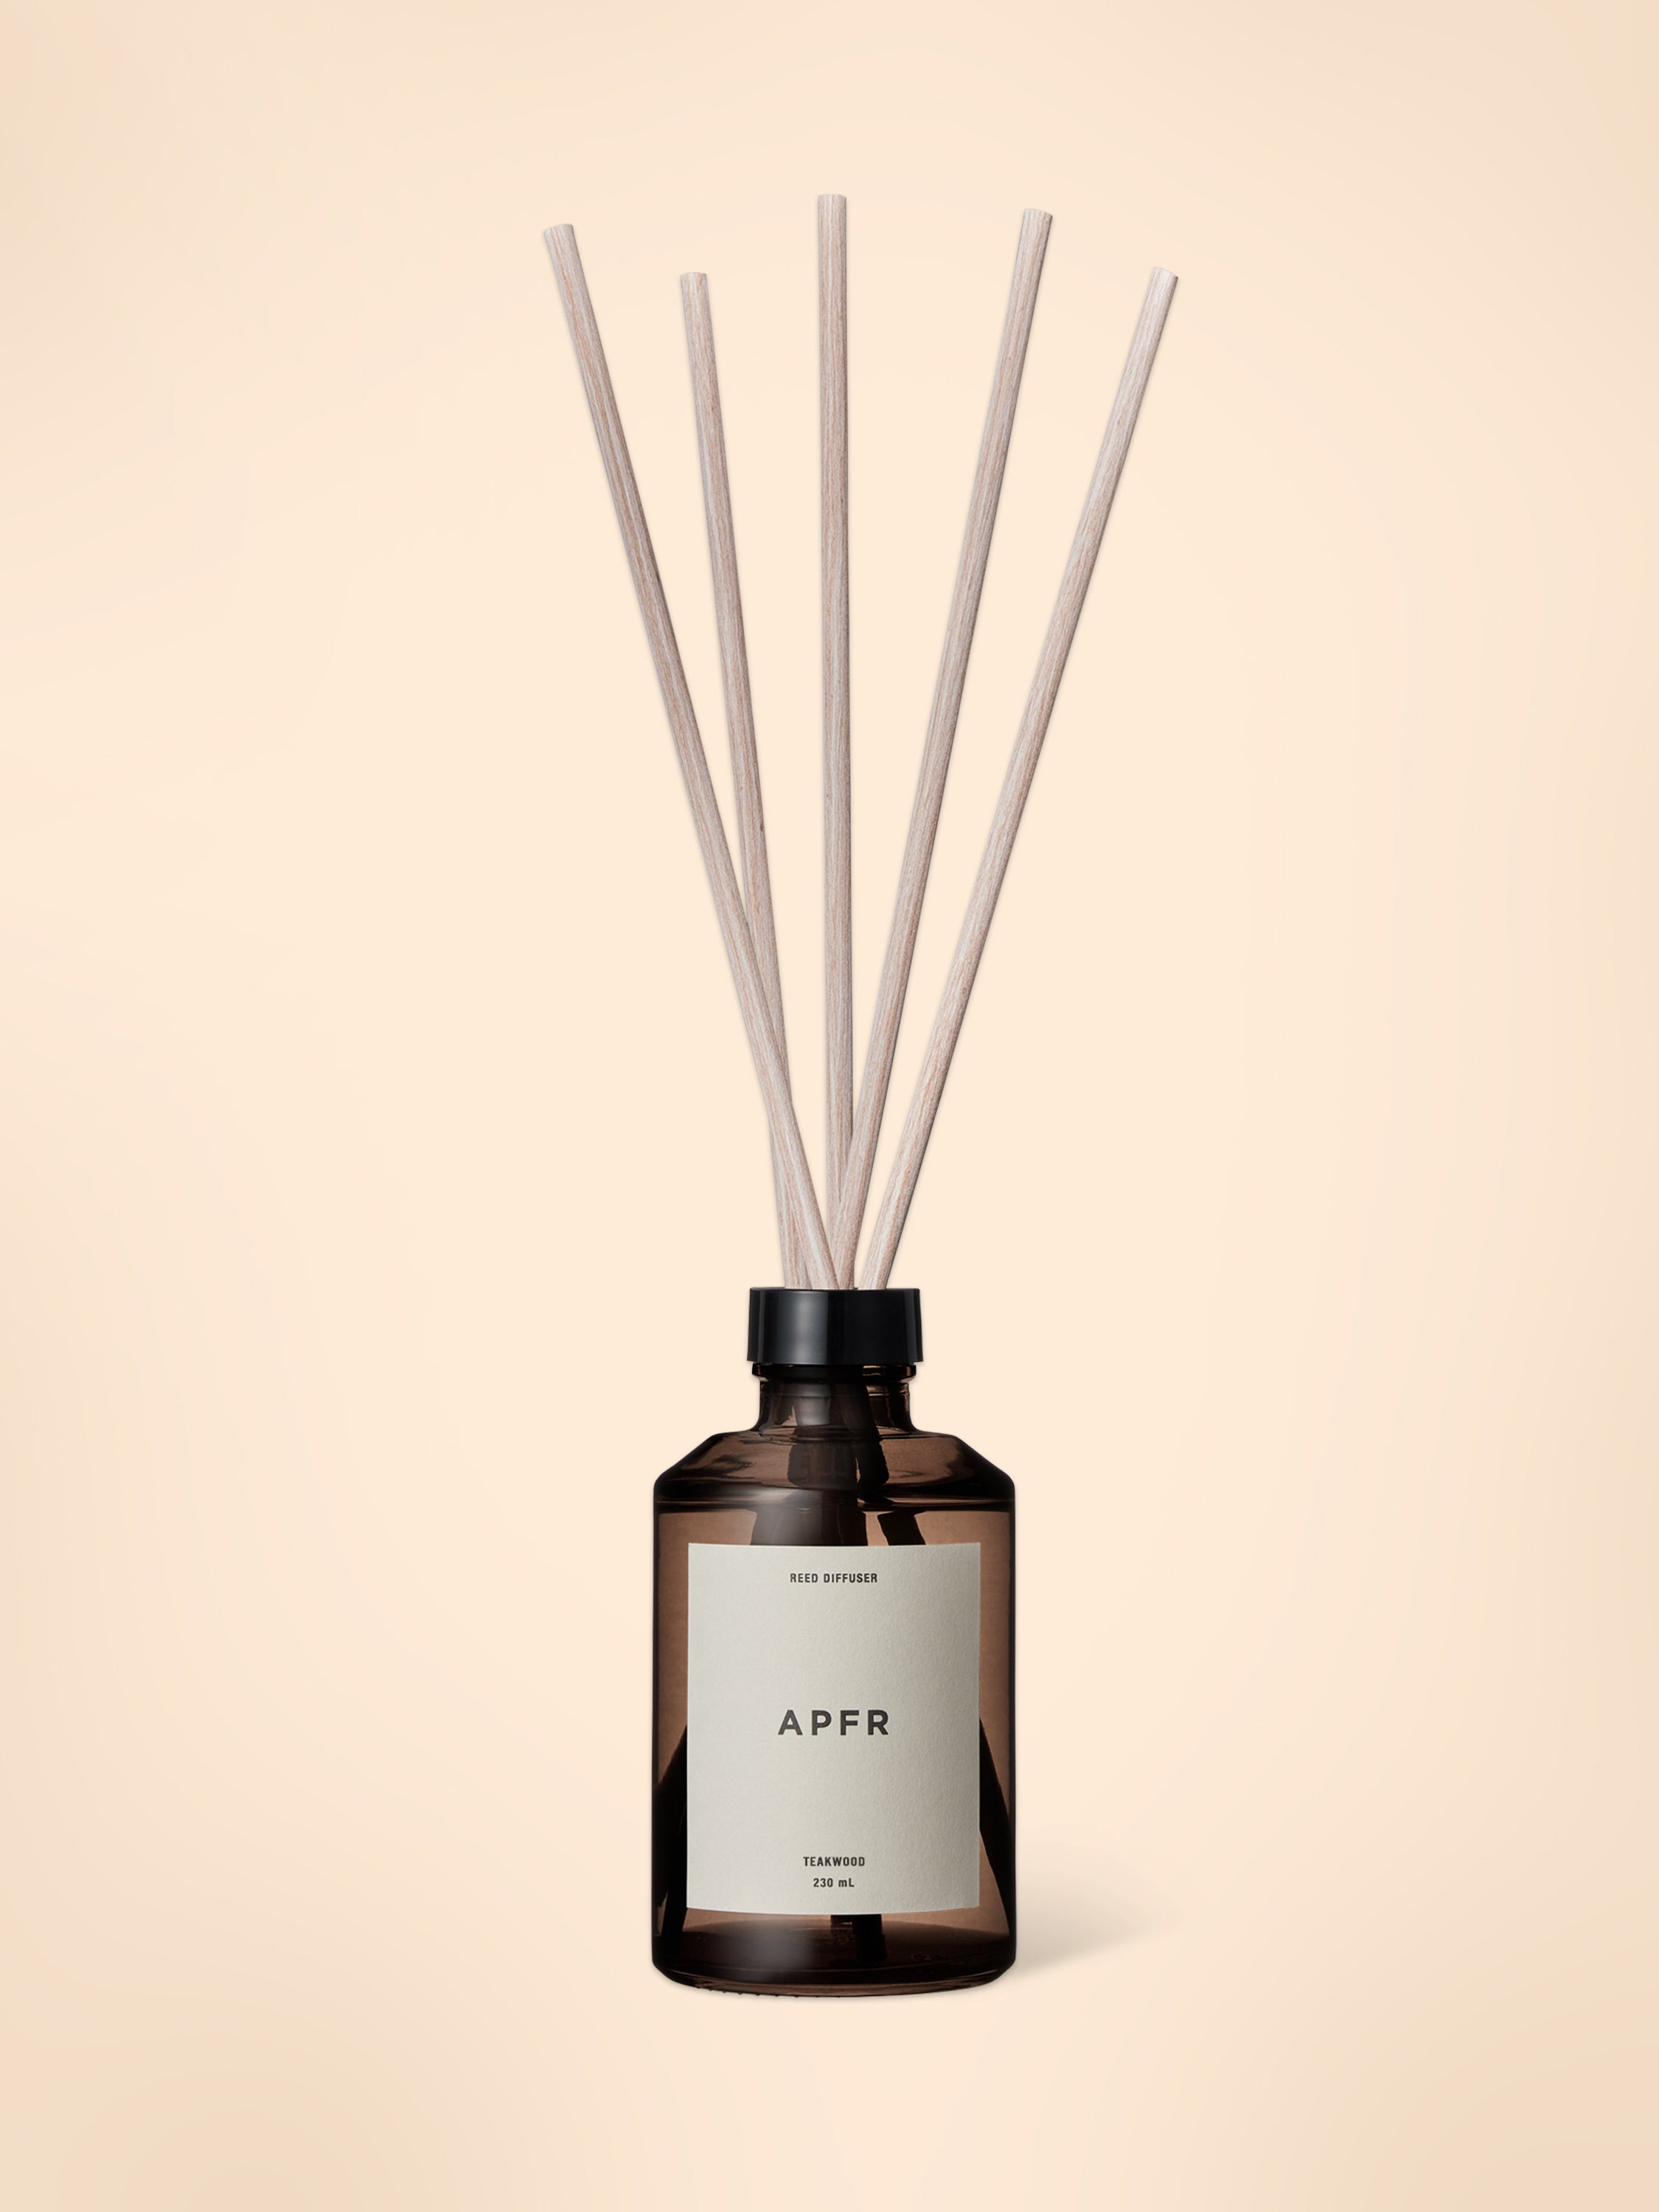 APFR Reed Diffuser shown with diffuser sticks | lifestyle